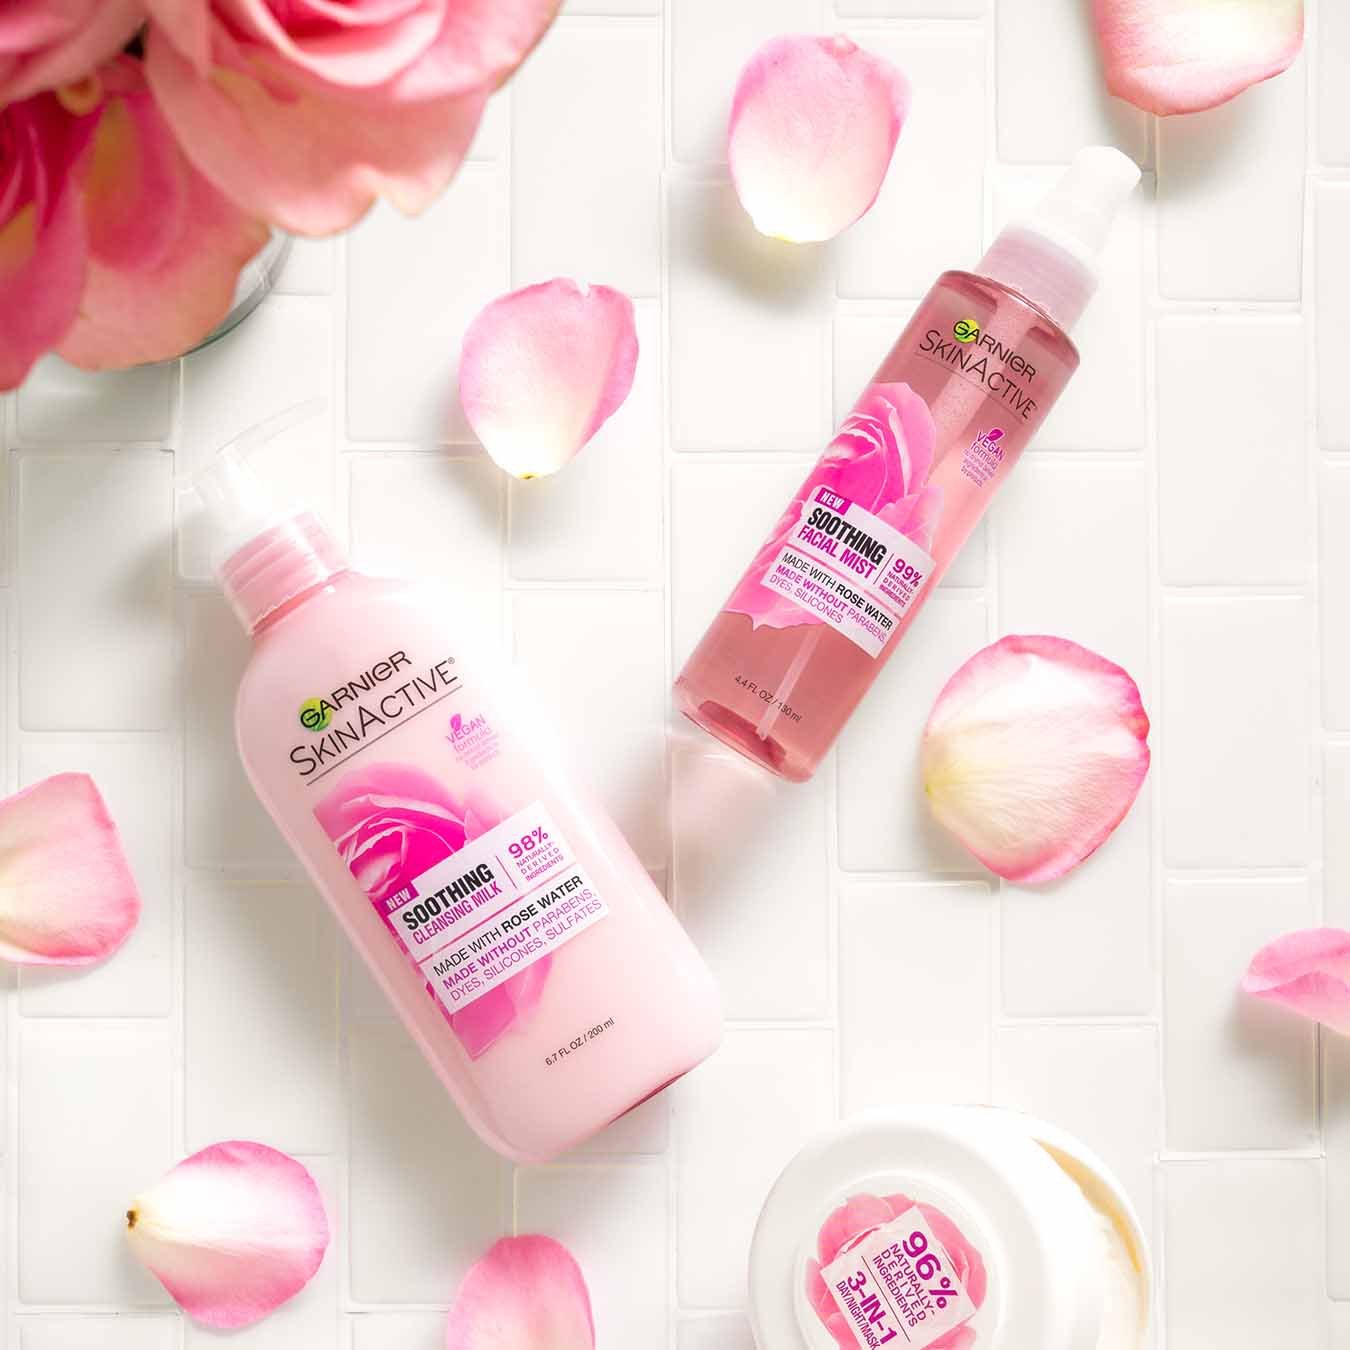 Garnier SkinActive Soothing Cleansing Milk, SkinActive Soothing Facial Mist, SkinActive 3-in-1 Day/Night Mask ajar on white tile with pink rose petals and a vase of pink roses.